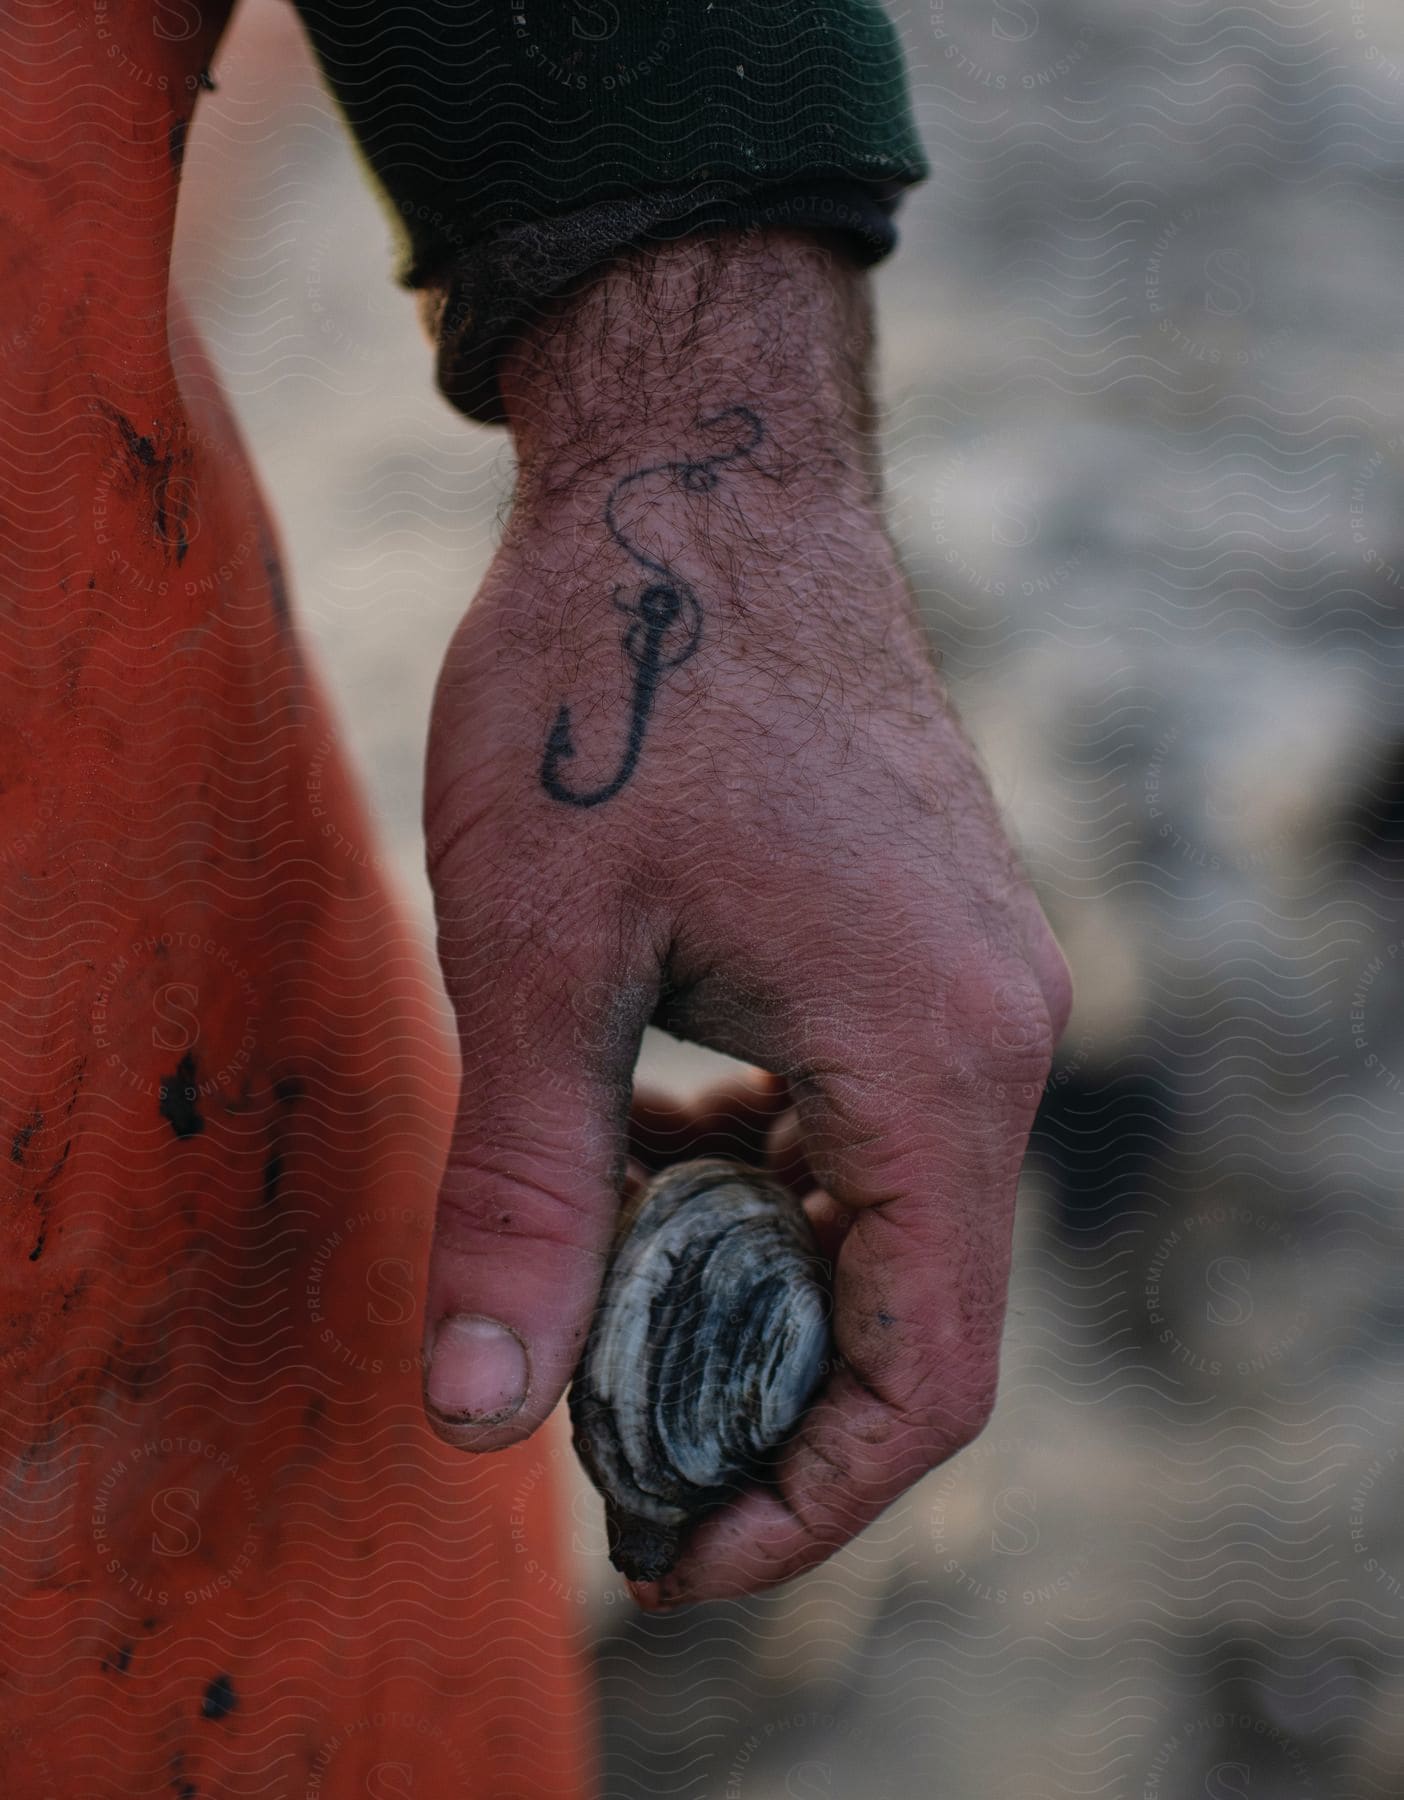 A hand with an anchor tattoo holds a clam